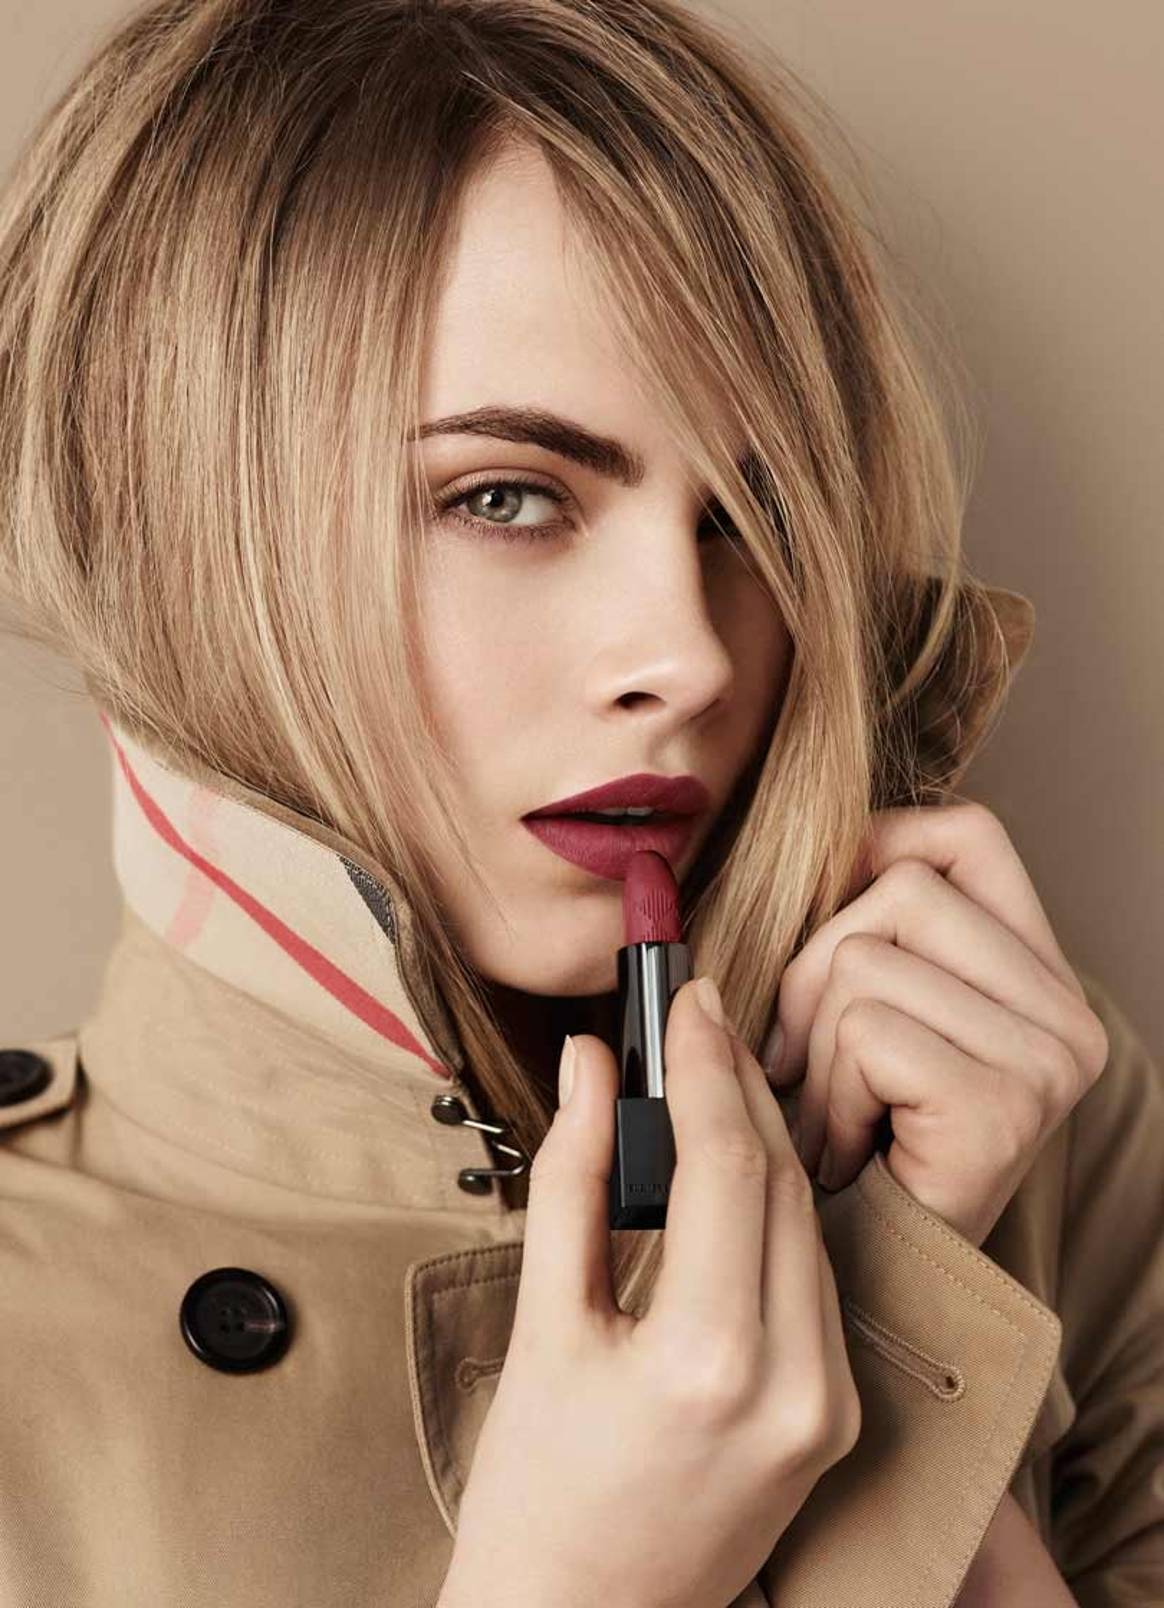 Burberry Beauty signs global licensing agreement with Coty